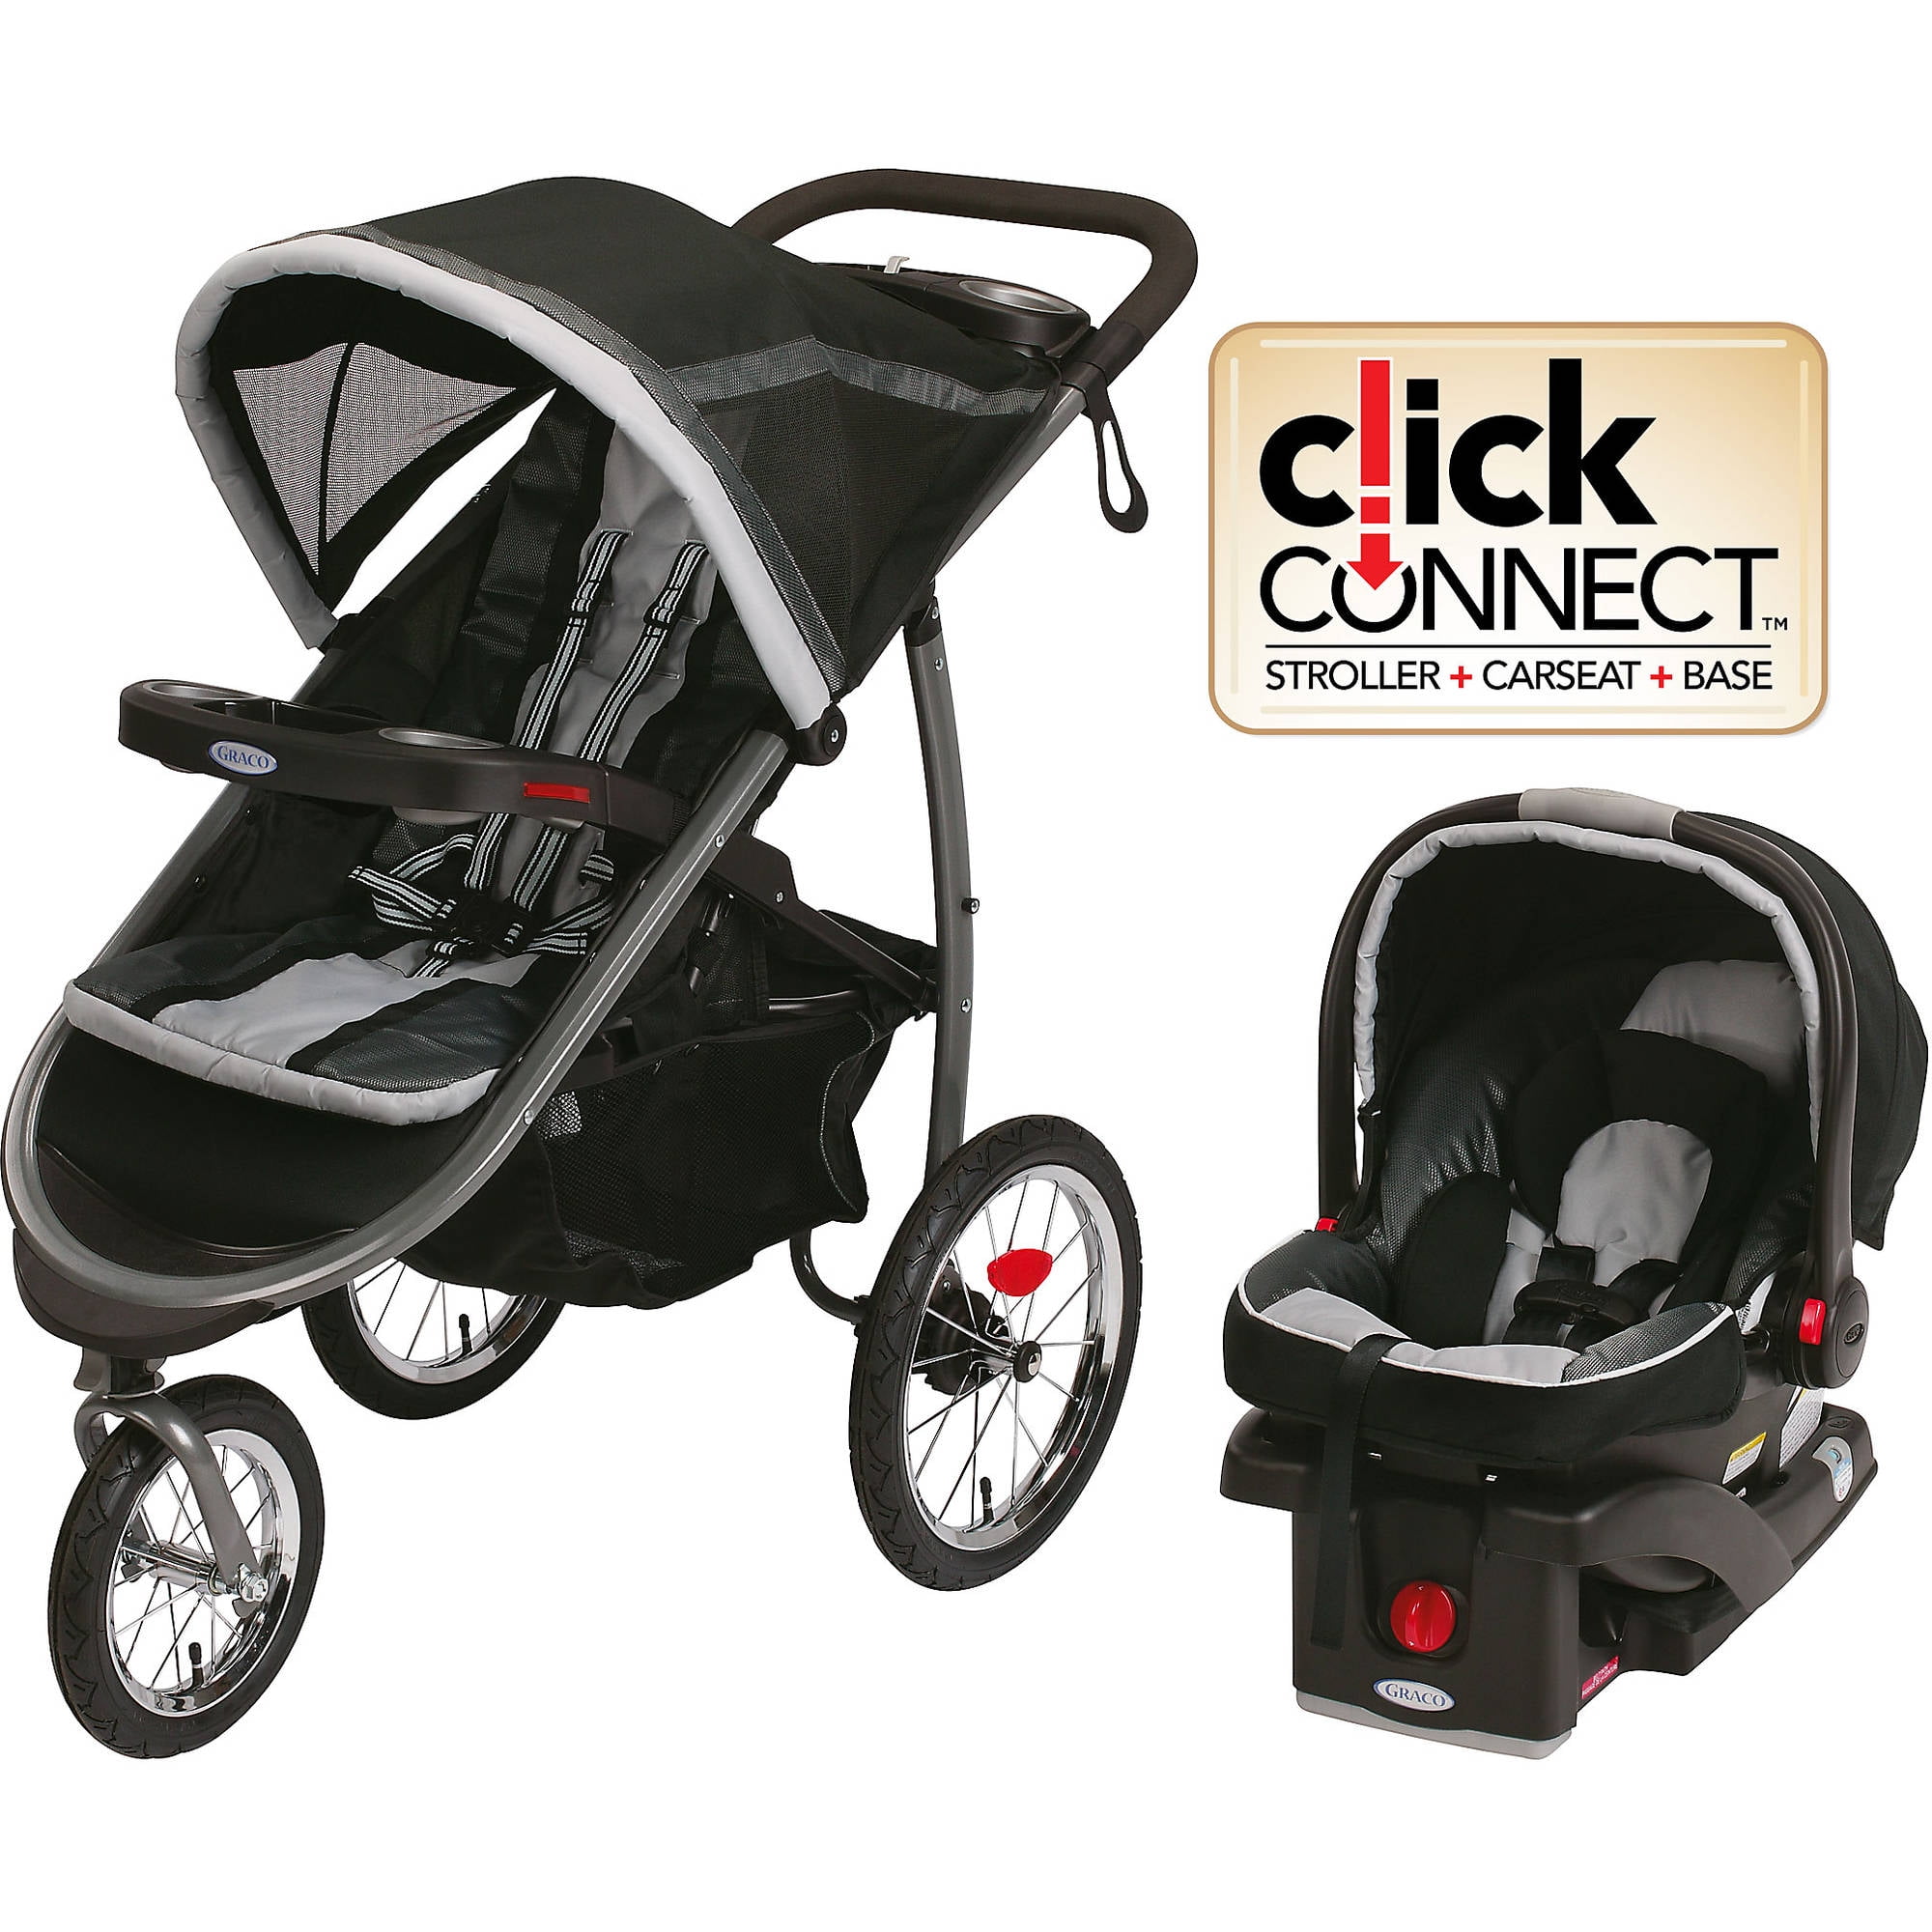 graco stroller and car seat walmart